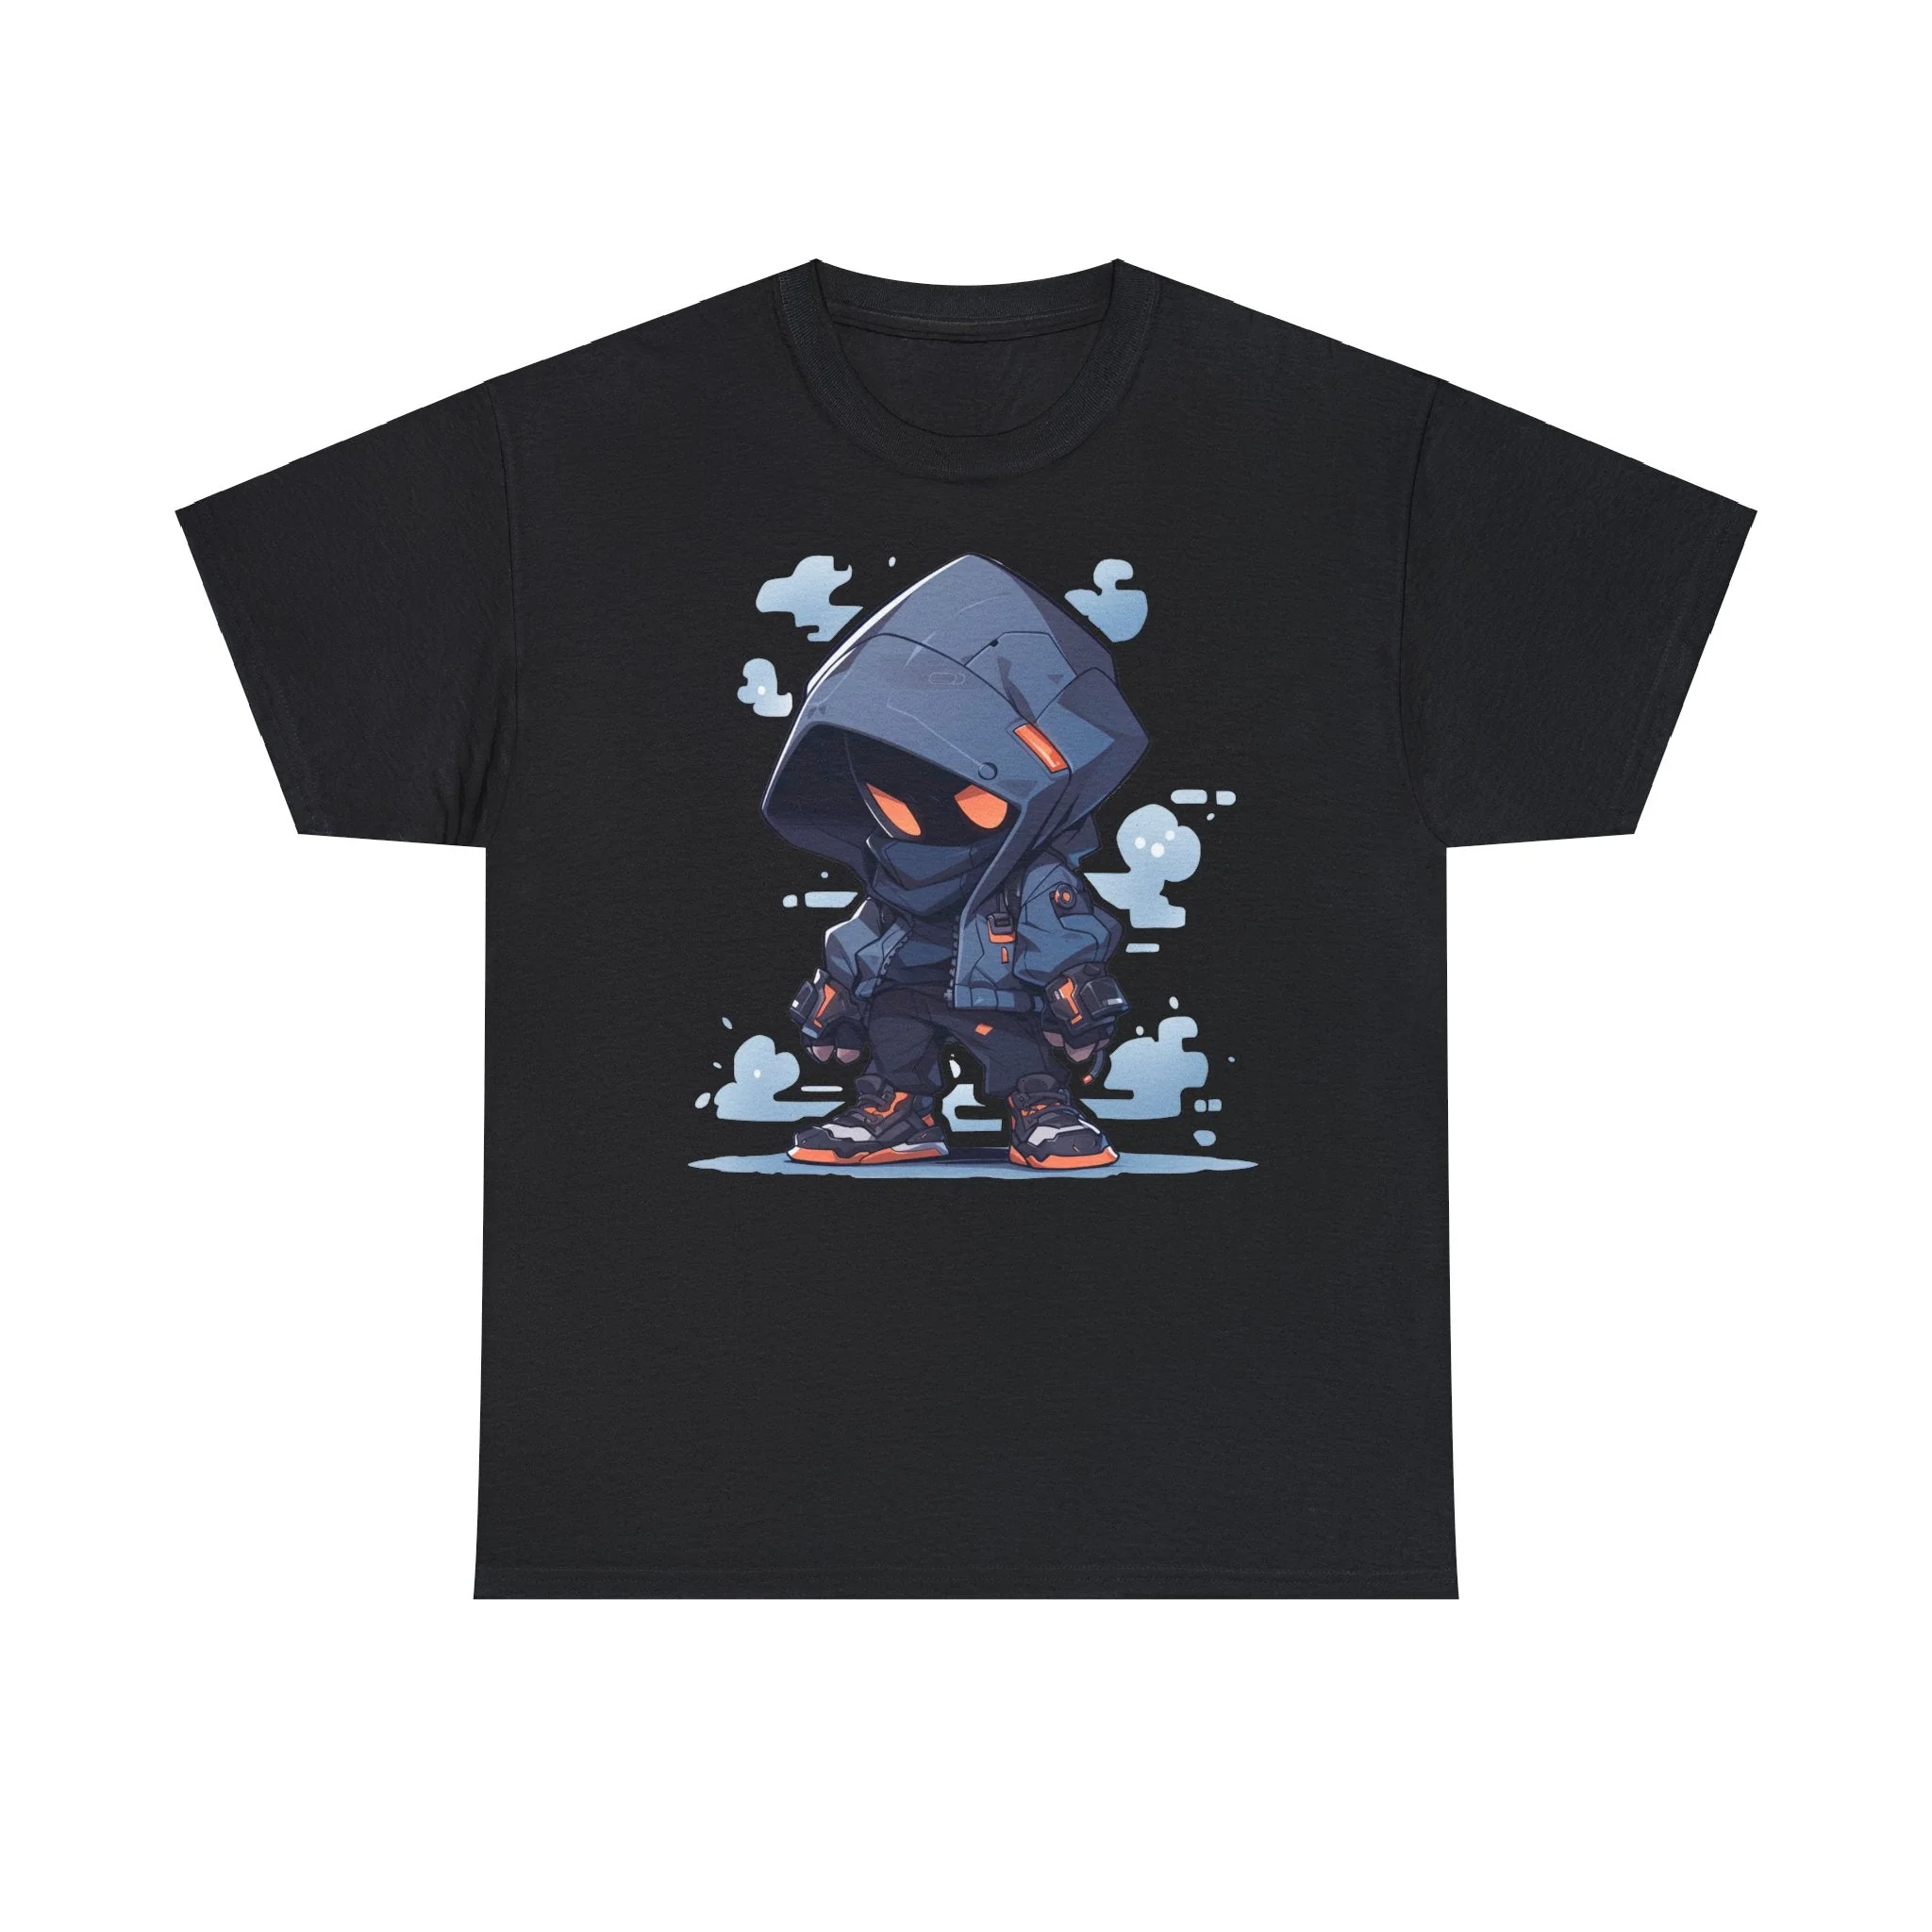 Mysterious Hooded Character T-Shirt